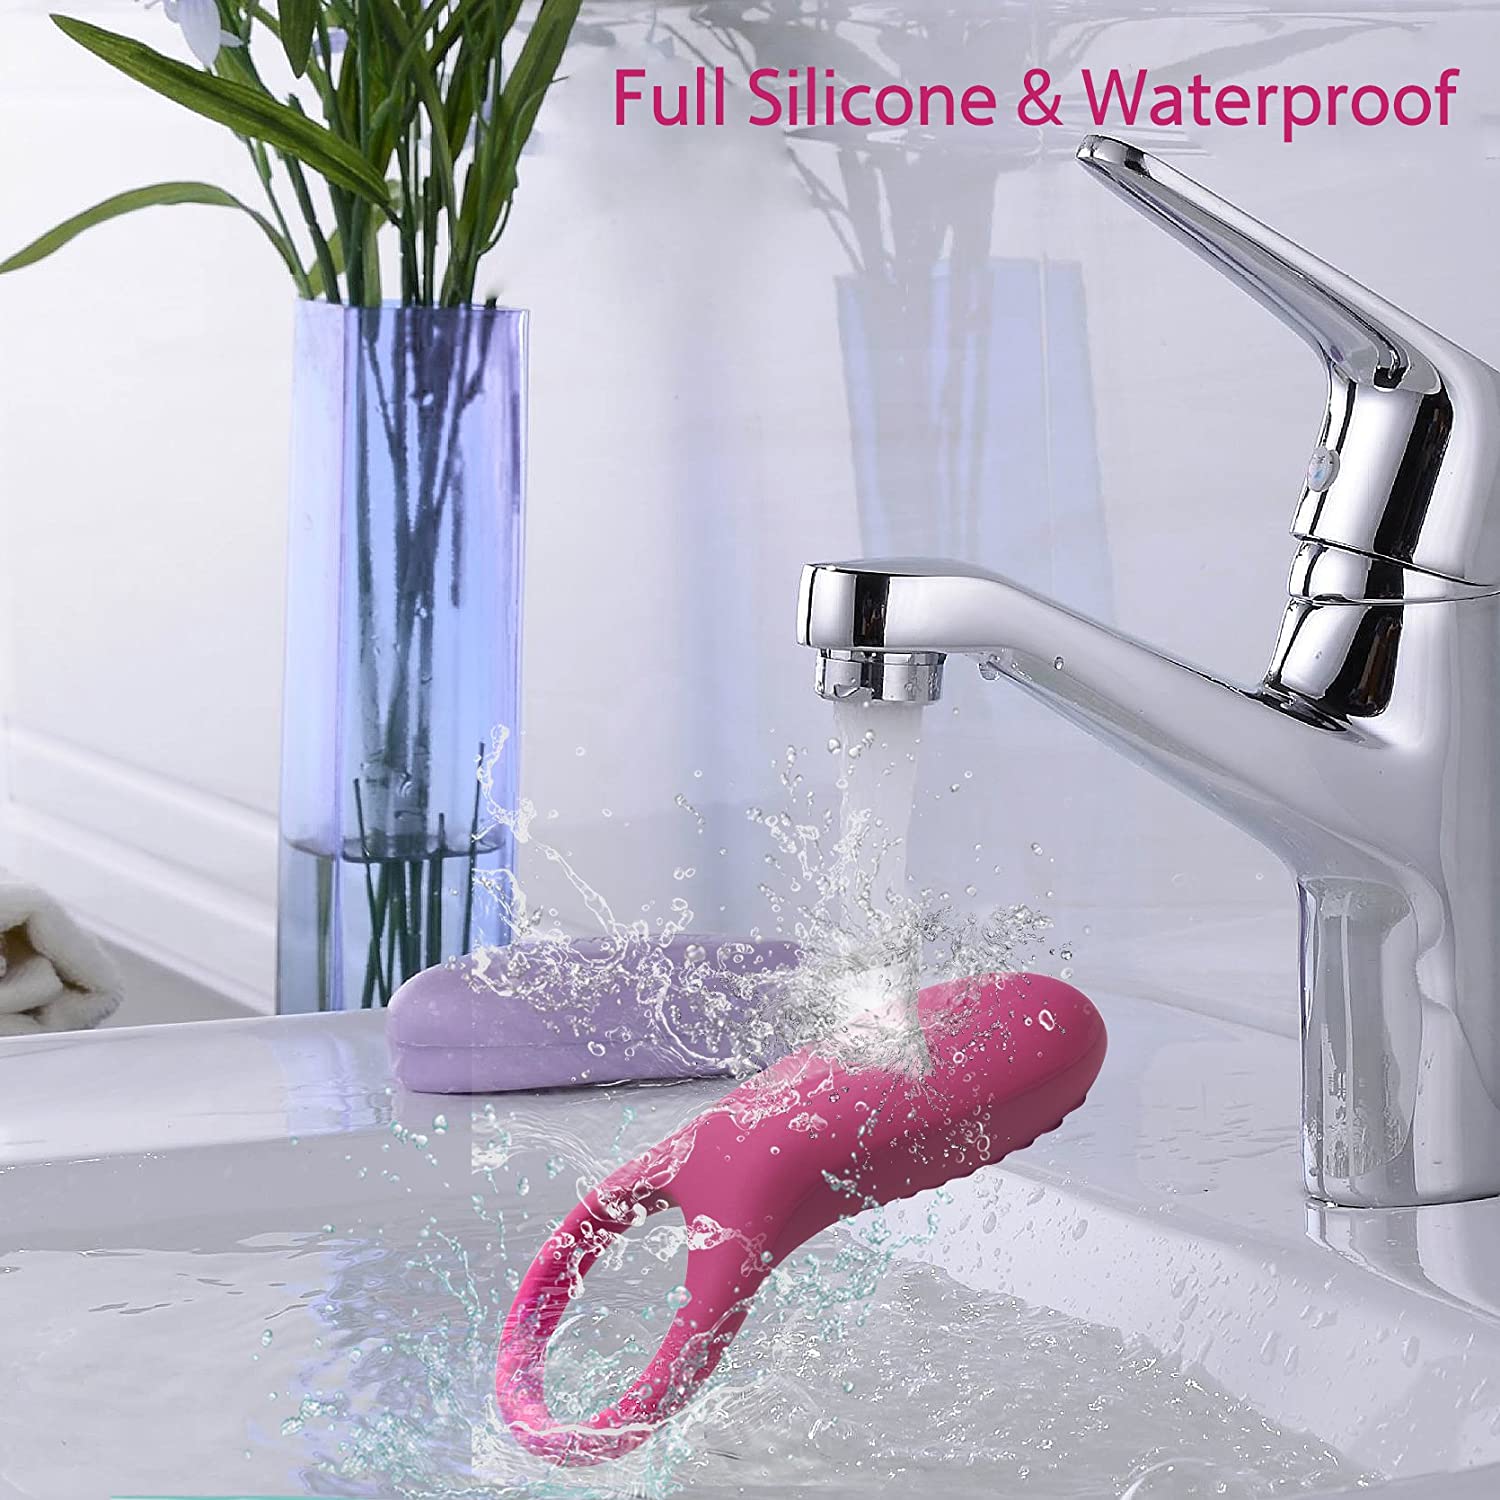 Full Silicone Vibrating Cock Ring - Waterproof Rechargeable Penis Ring Vibrator - Sex Toy for Male or Couples (Wine Red)